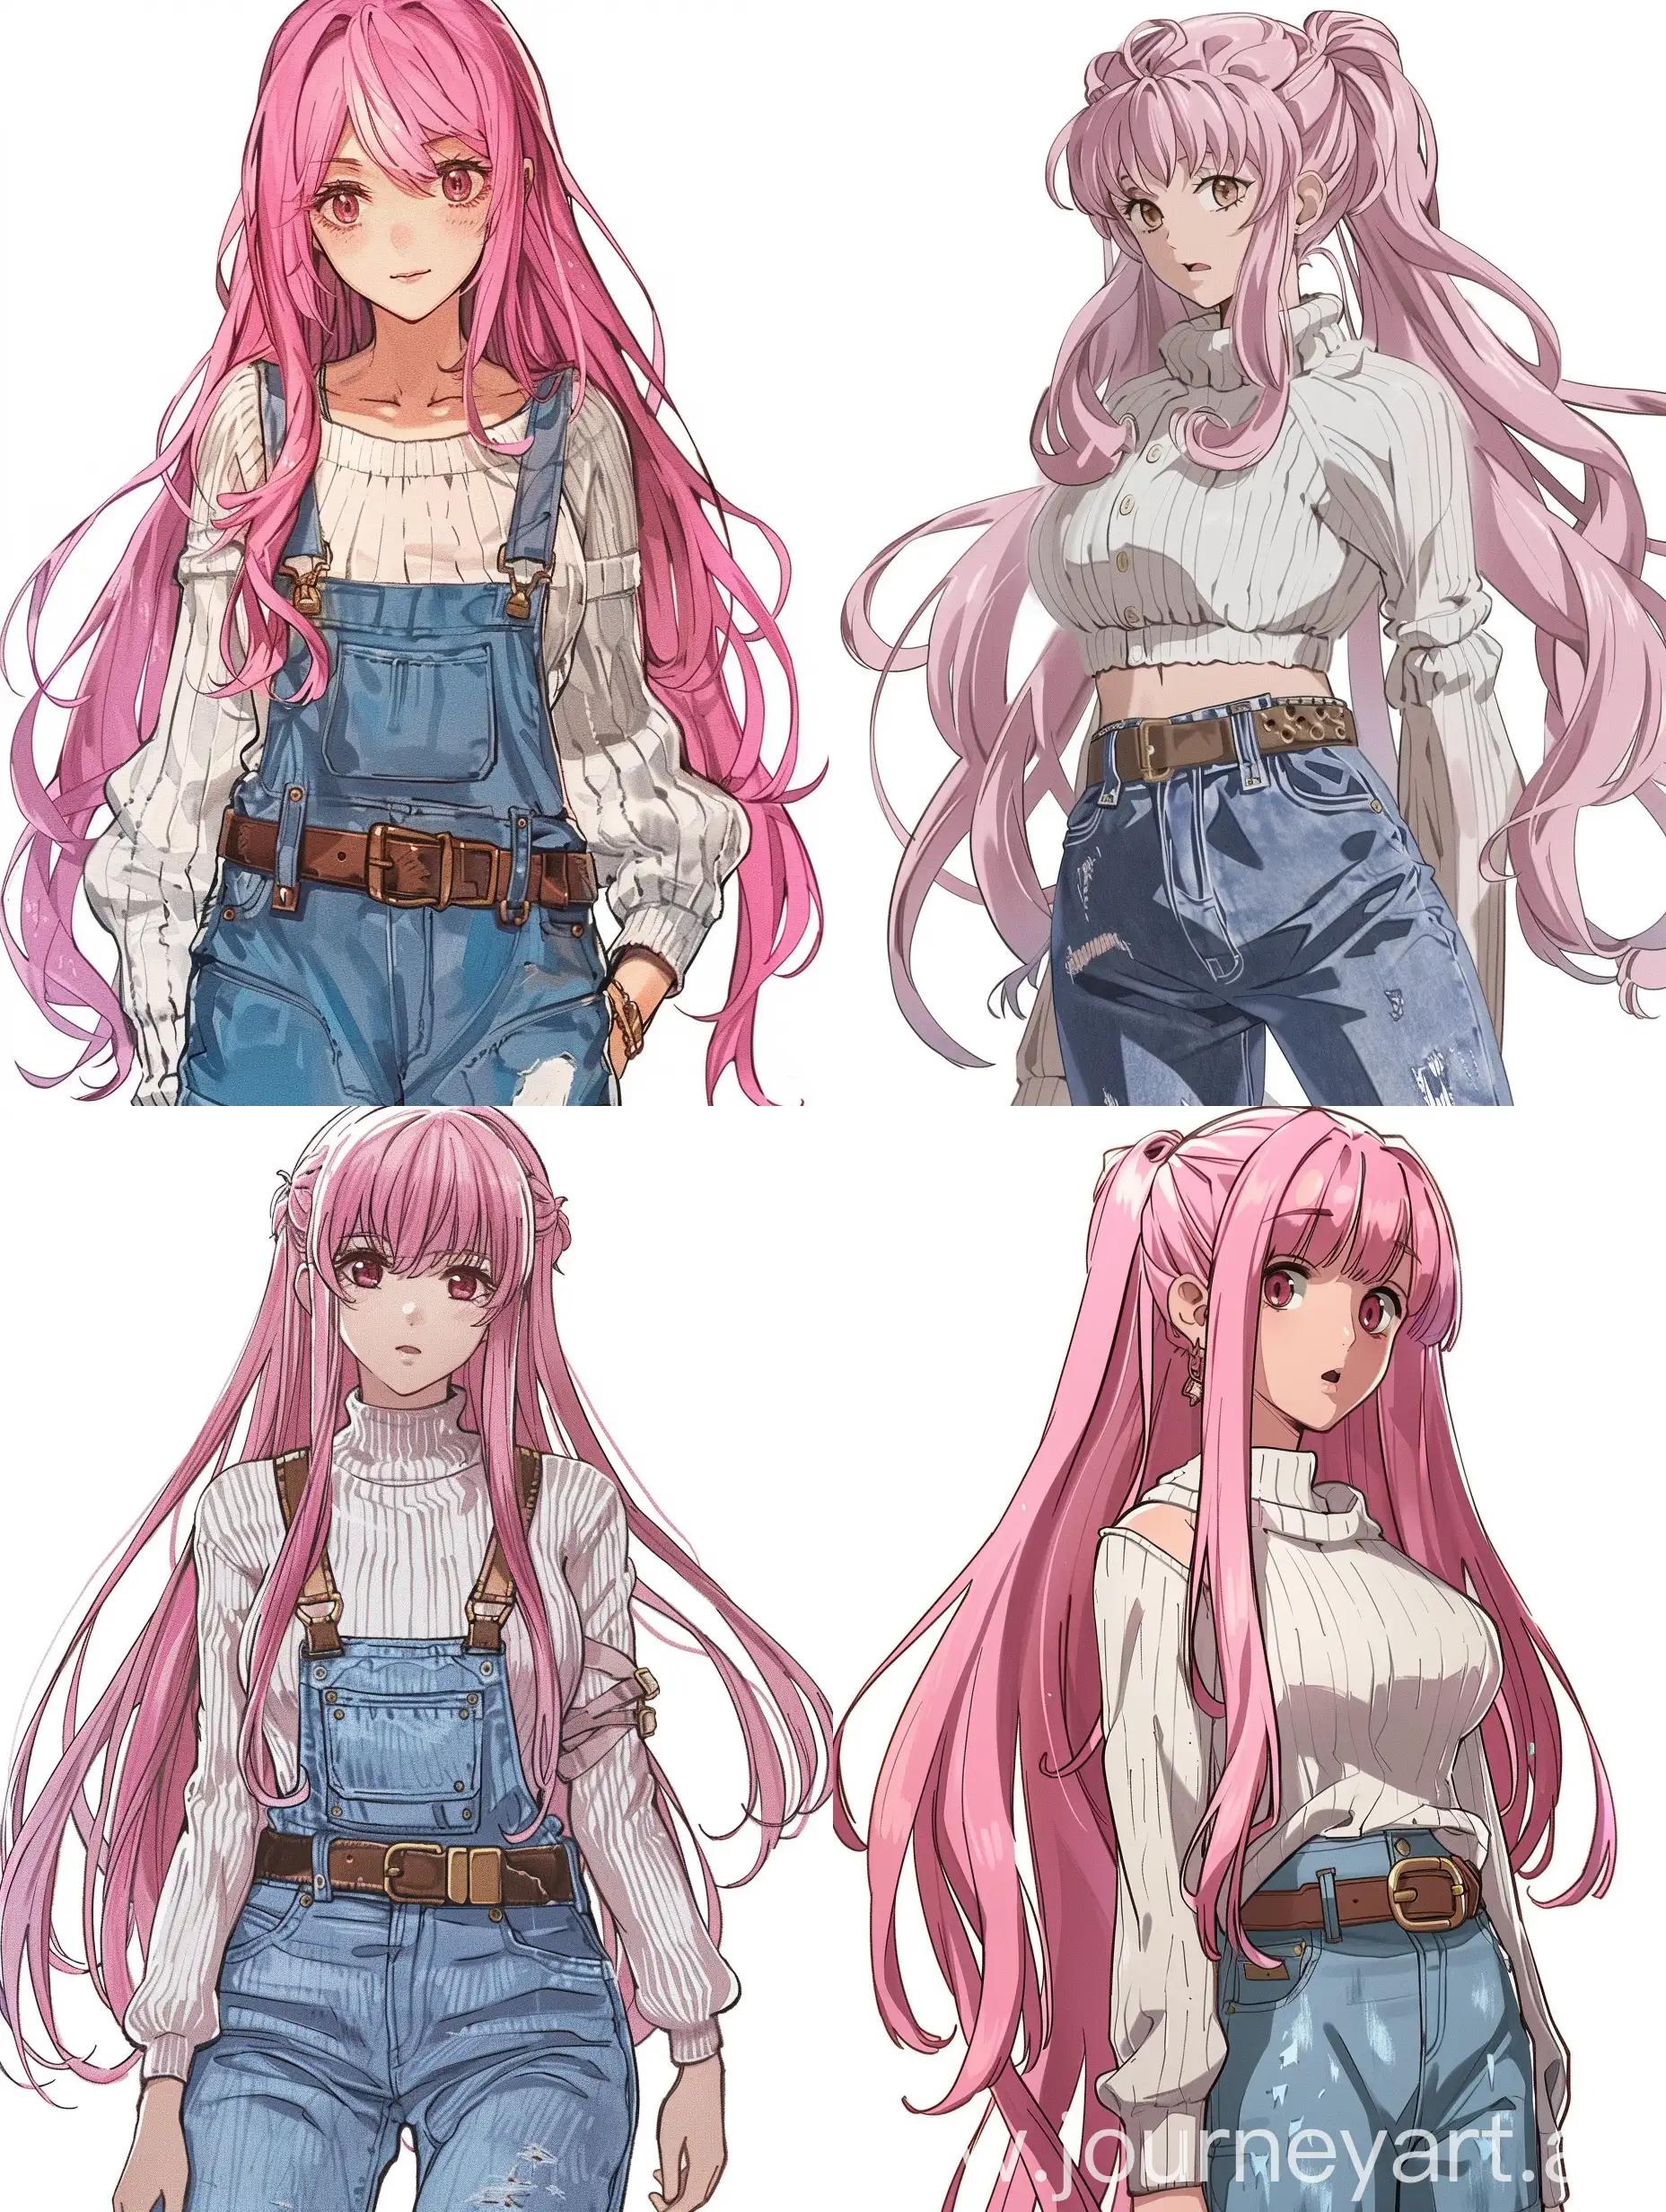 Honami ichinose with long flowing pink hair ,a pensive expression on her face,photo screenshot from light novel illustration, ((Honami ichinose)) ,,Honami ichinose from classroom of the elite light novel,, She is wearing a white knitting sweater with long sleeves , distressed denim overalls cinched at the waist with a brown belt. Her wrist is adorned with a layered sleeves, adding to her relaxed yet stylish look. The image has a light novel illustration cover like quality,Ichinose raitonoberu `yōkoso jitsuryoku shijō shugi no kyōshitsu e' no irasuto, tomose art